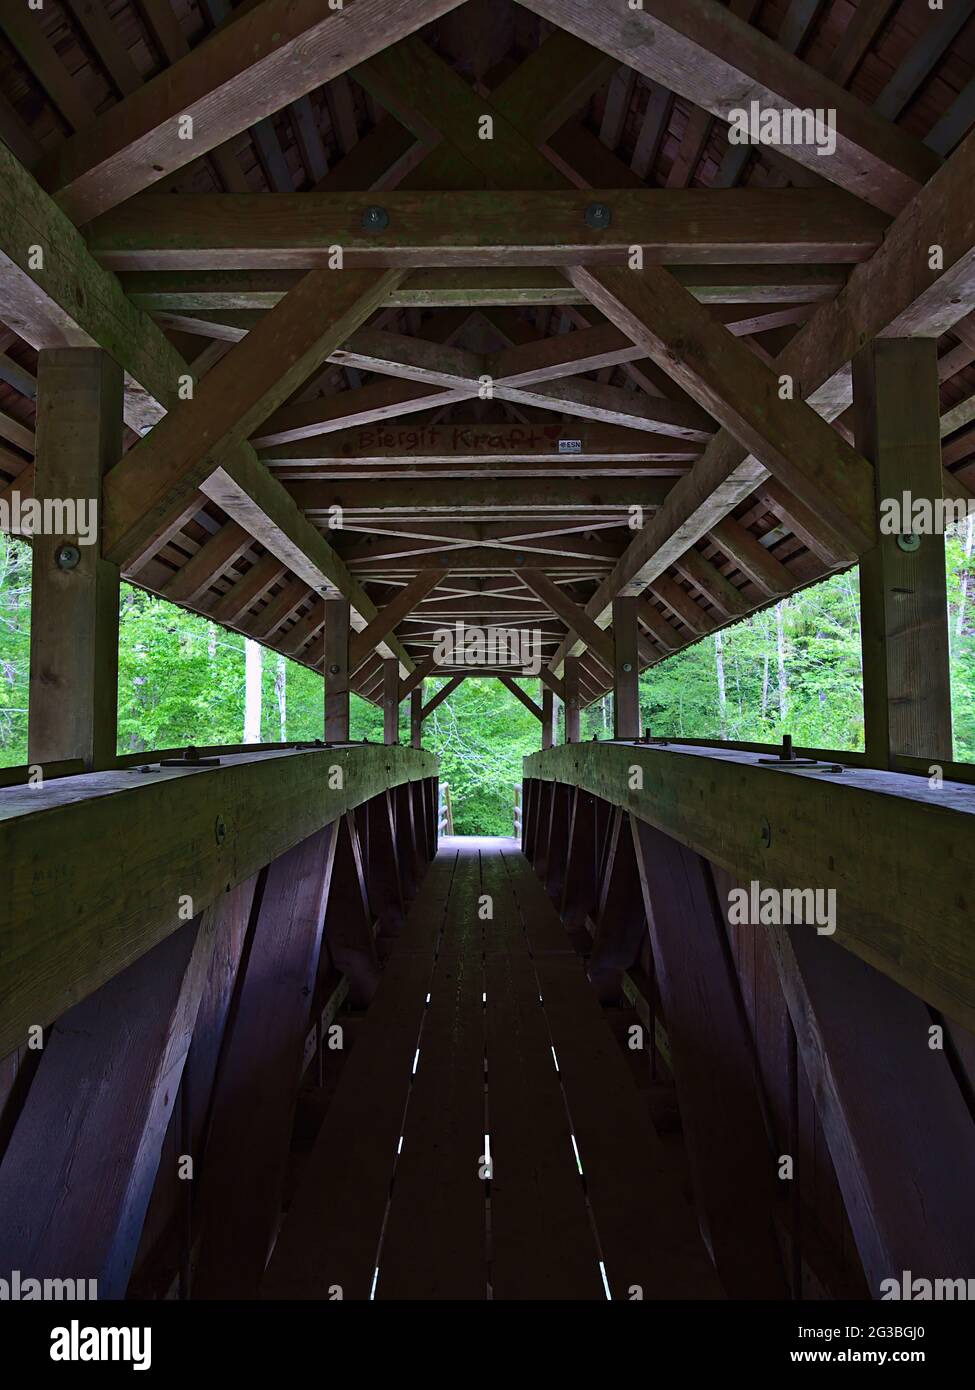 Symmetrical view with diminishing perspective of the interior of a covered wooden footbridge crossing river in Wutach Gorge ('Wutachschlucht'). Stock Photo